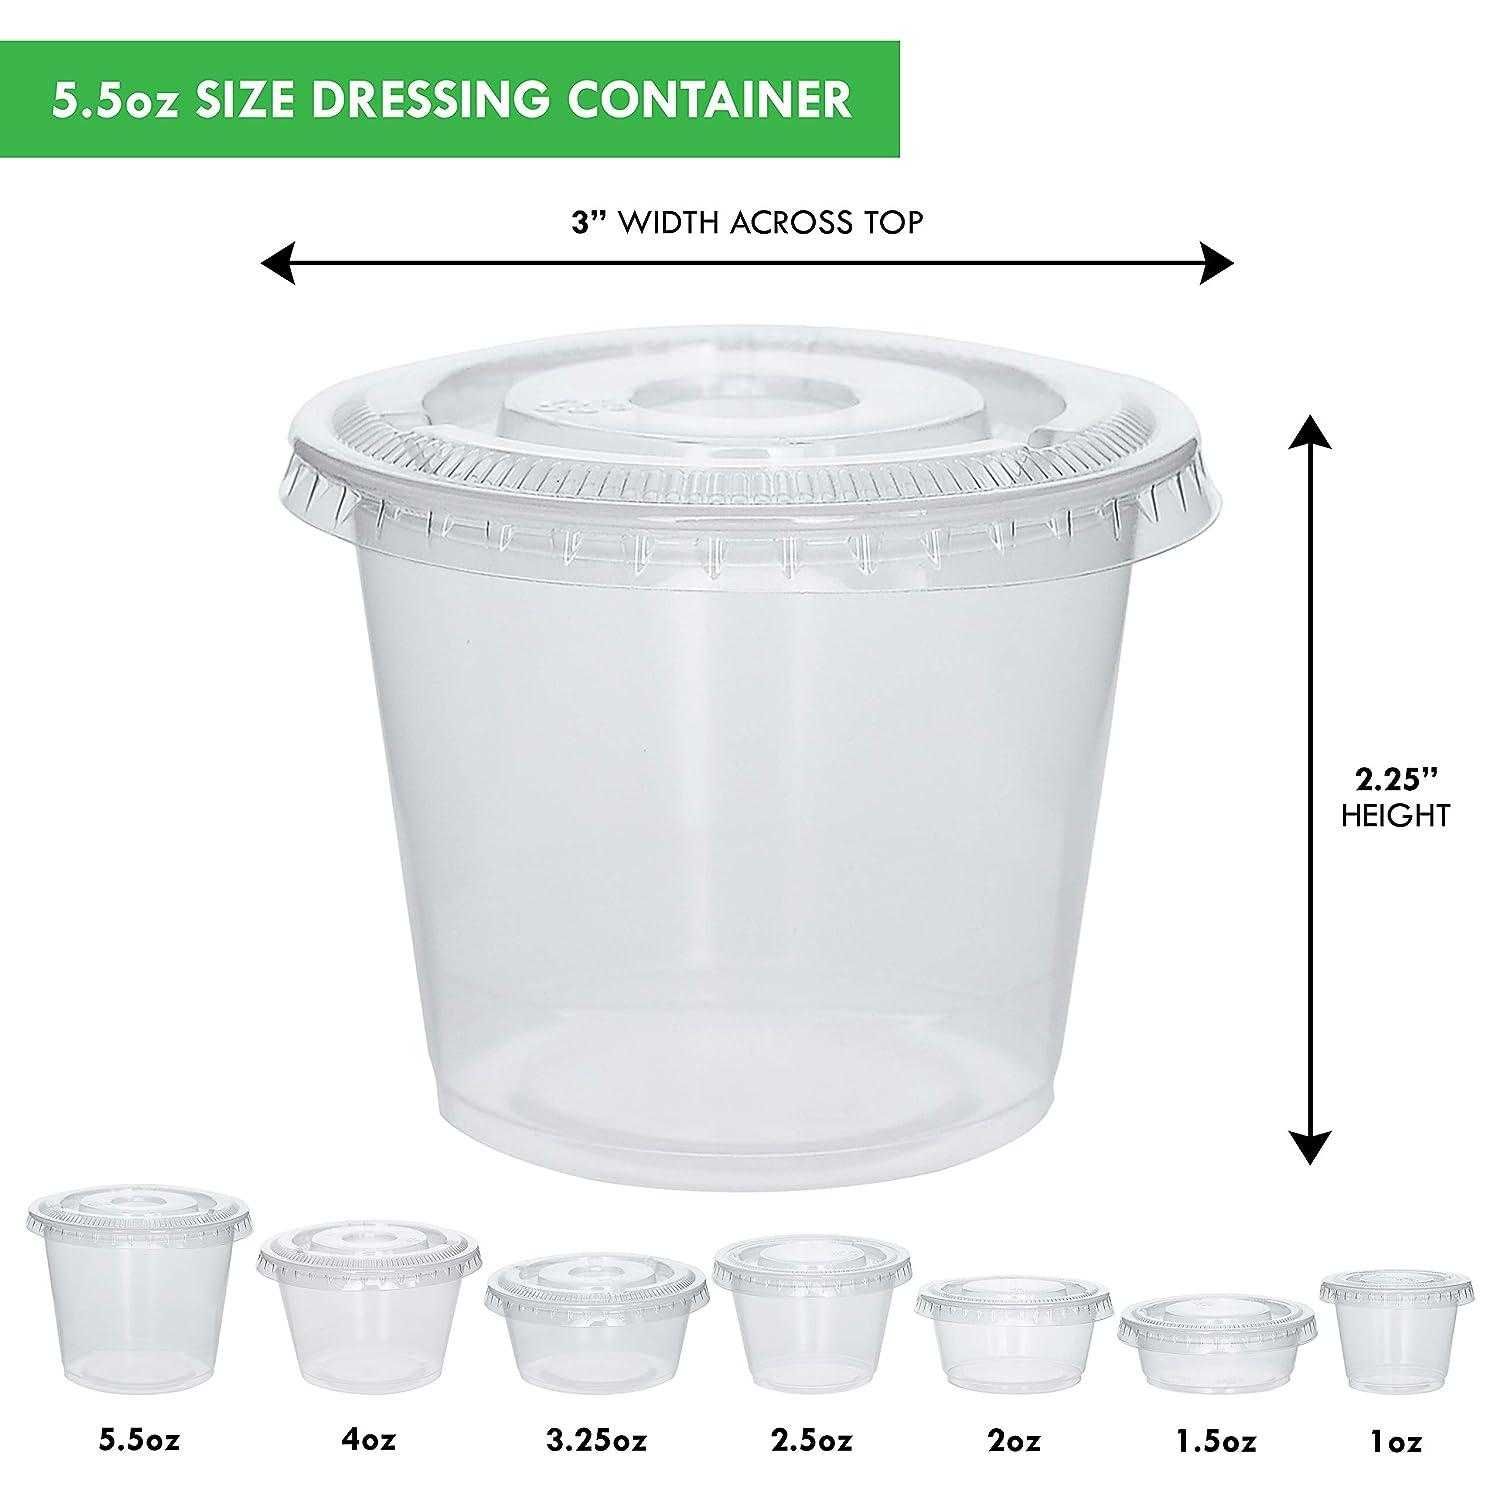 5 oz - 100 Sets} Clear Diposable Plastic Portion Cups With Lids, Small Mini  Containers For